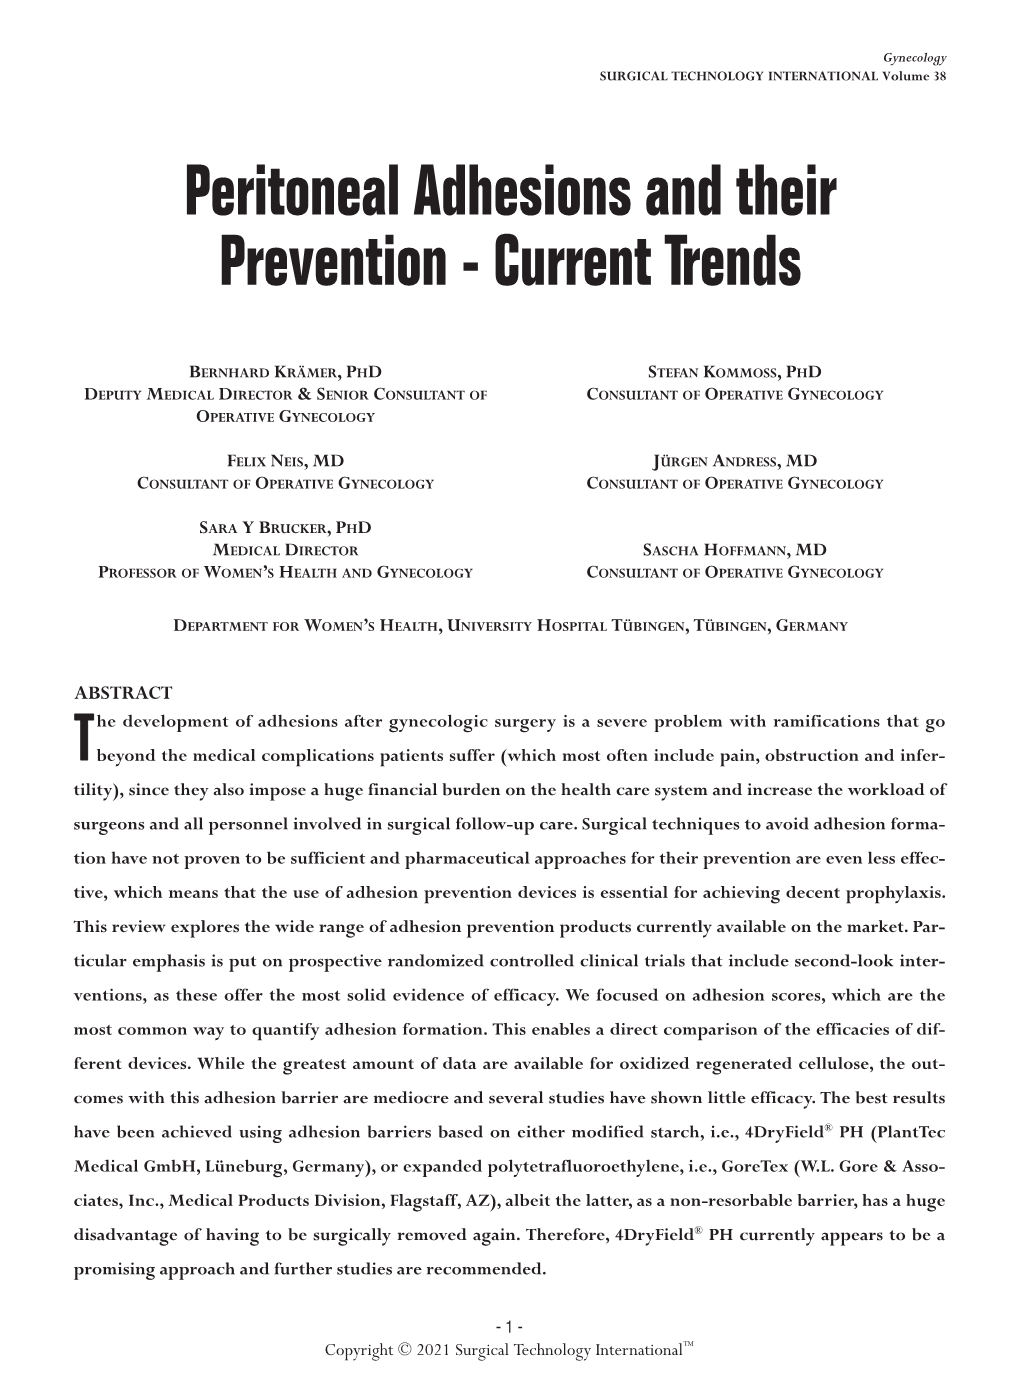 Peritoneal Adhesions and Their Prevention - Current Trends